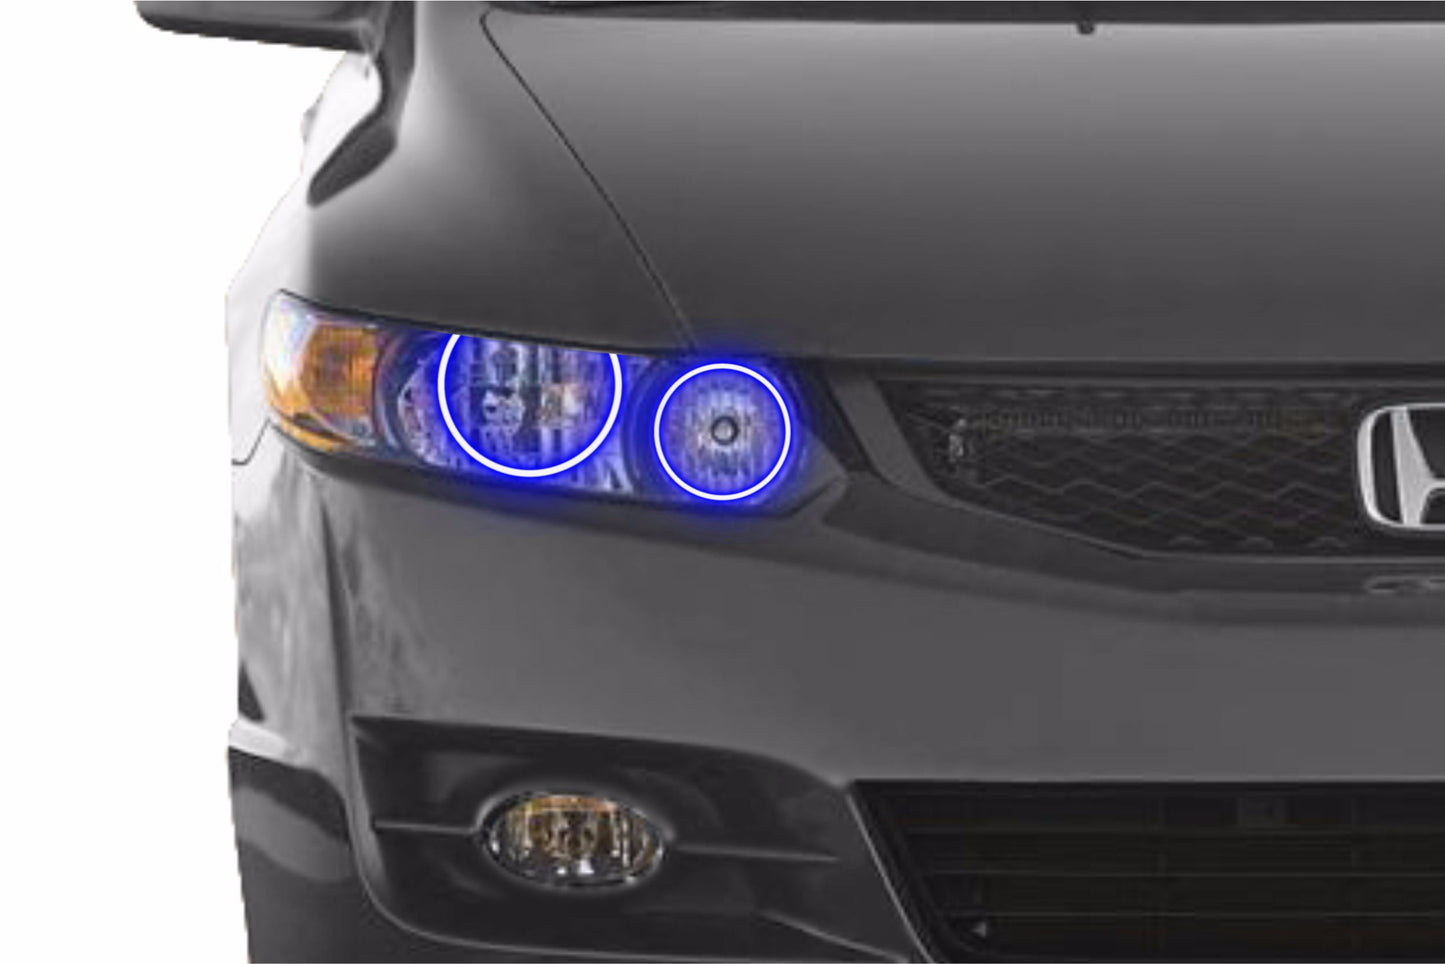 Honda Civic Coupe (09-11): Profile Prism Fitted Halos (Kit)